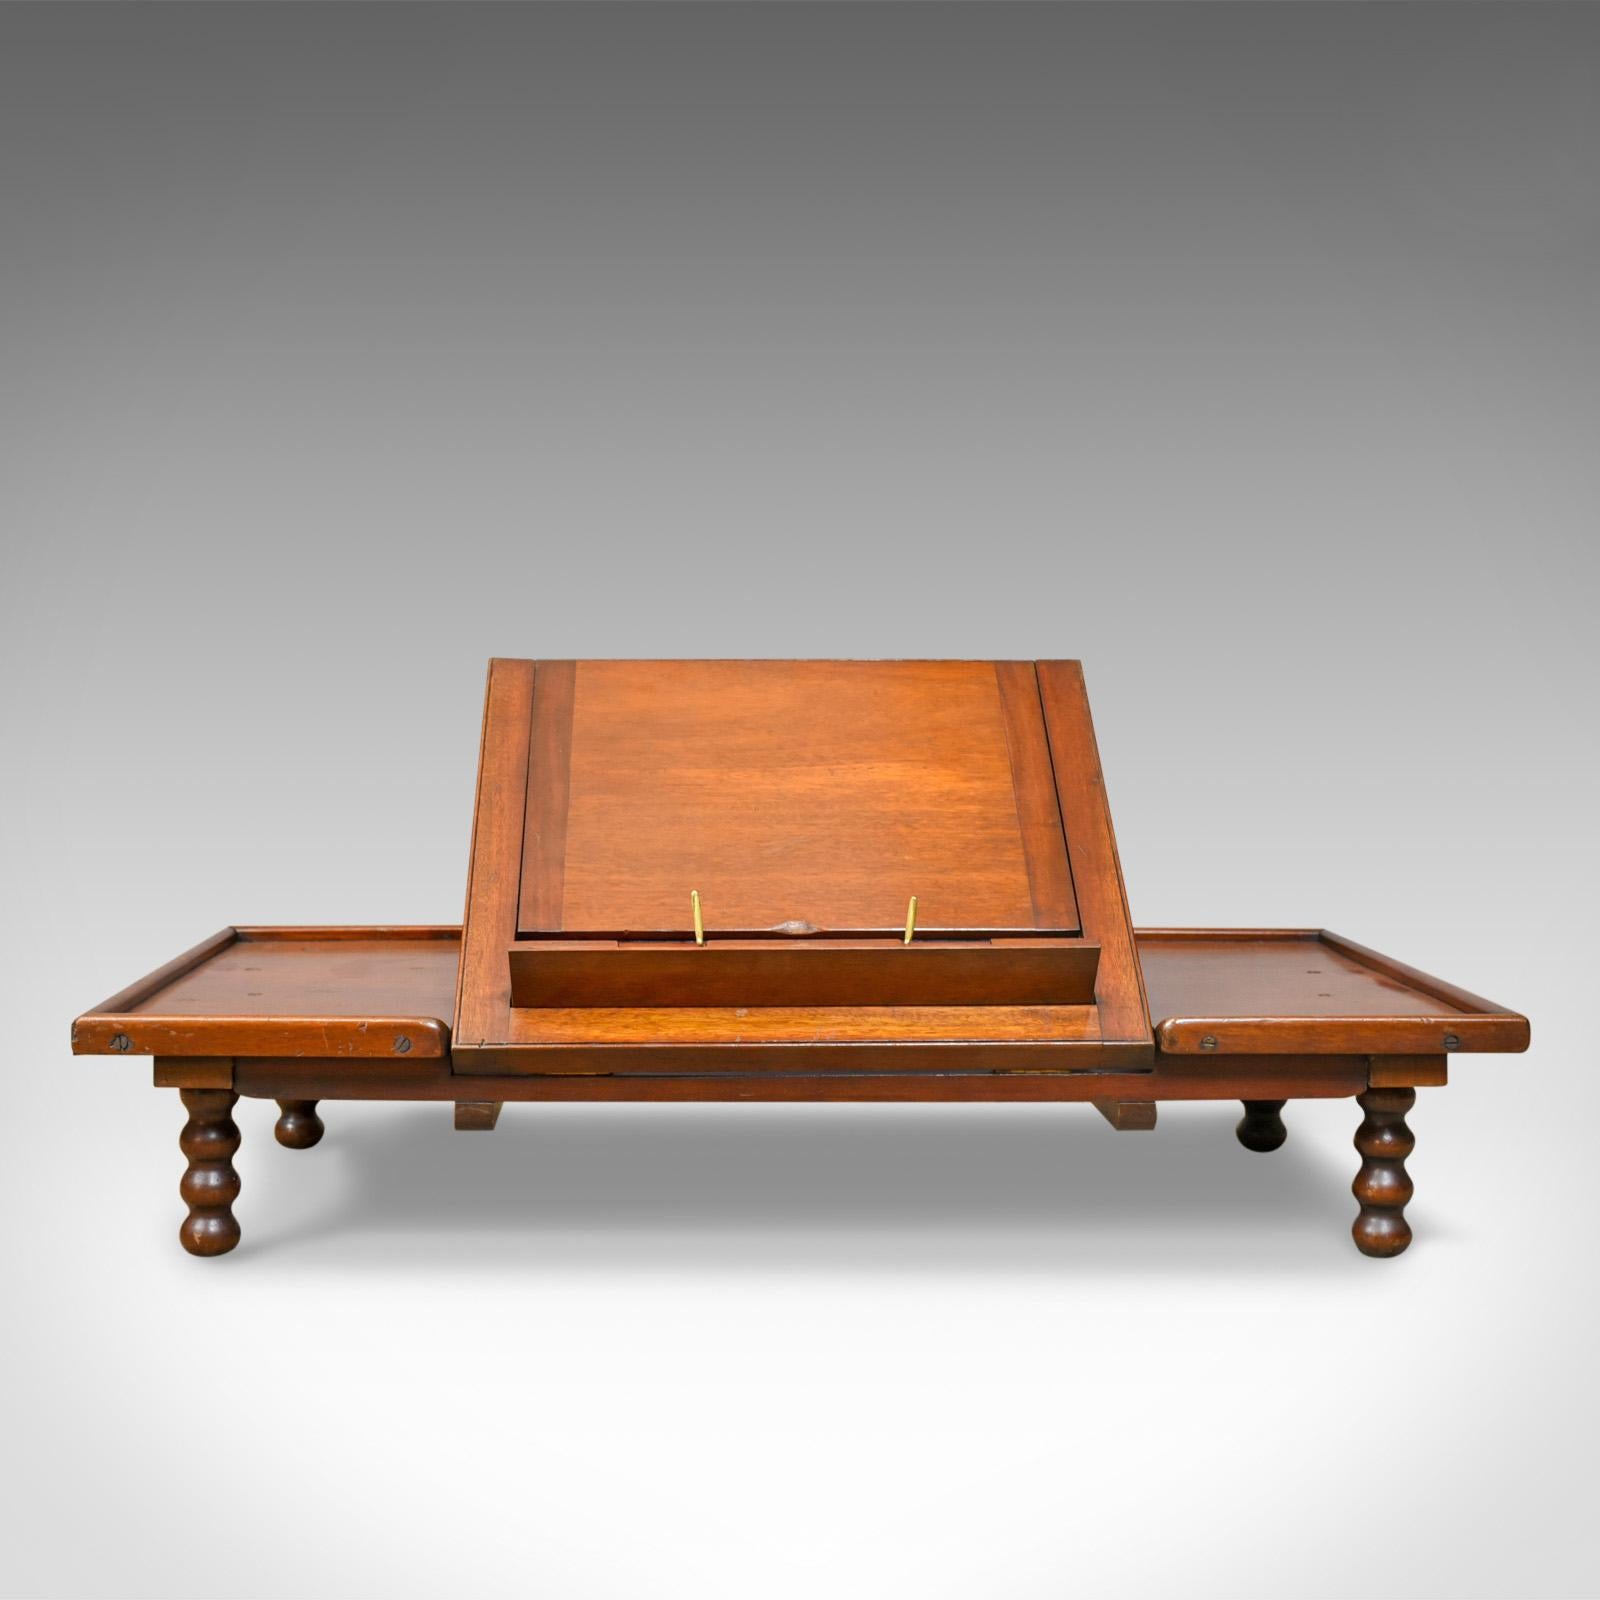 This is an adjustable antique reading table by John Carter, London. A Victorian, mahogany 'Literary Machine' lectern dating to the late 19th century, circa 1890.

In fine order, the mahogany displays good, consistent color
The quality stocks with